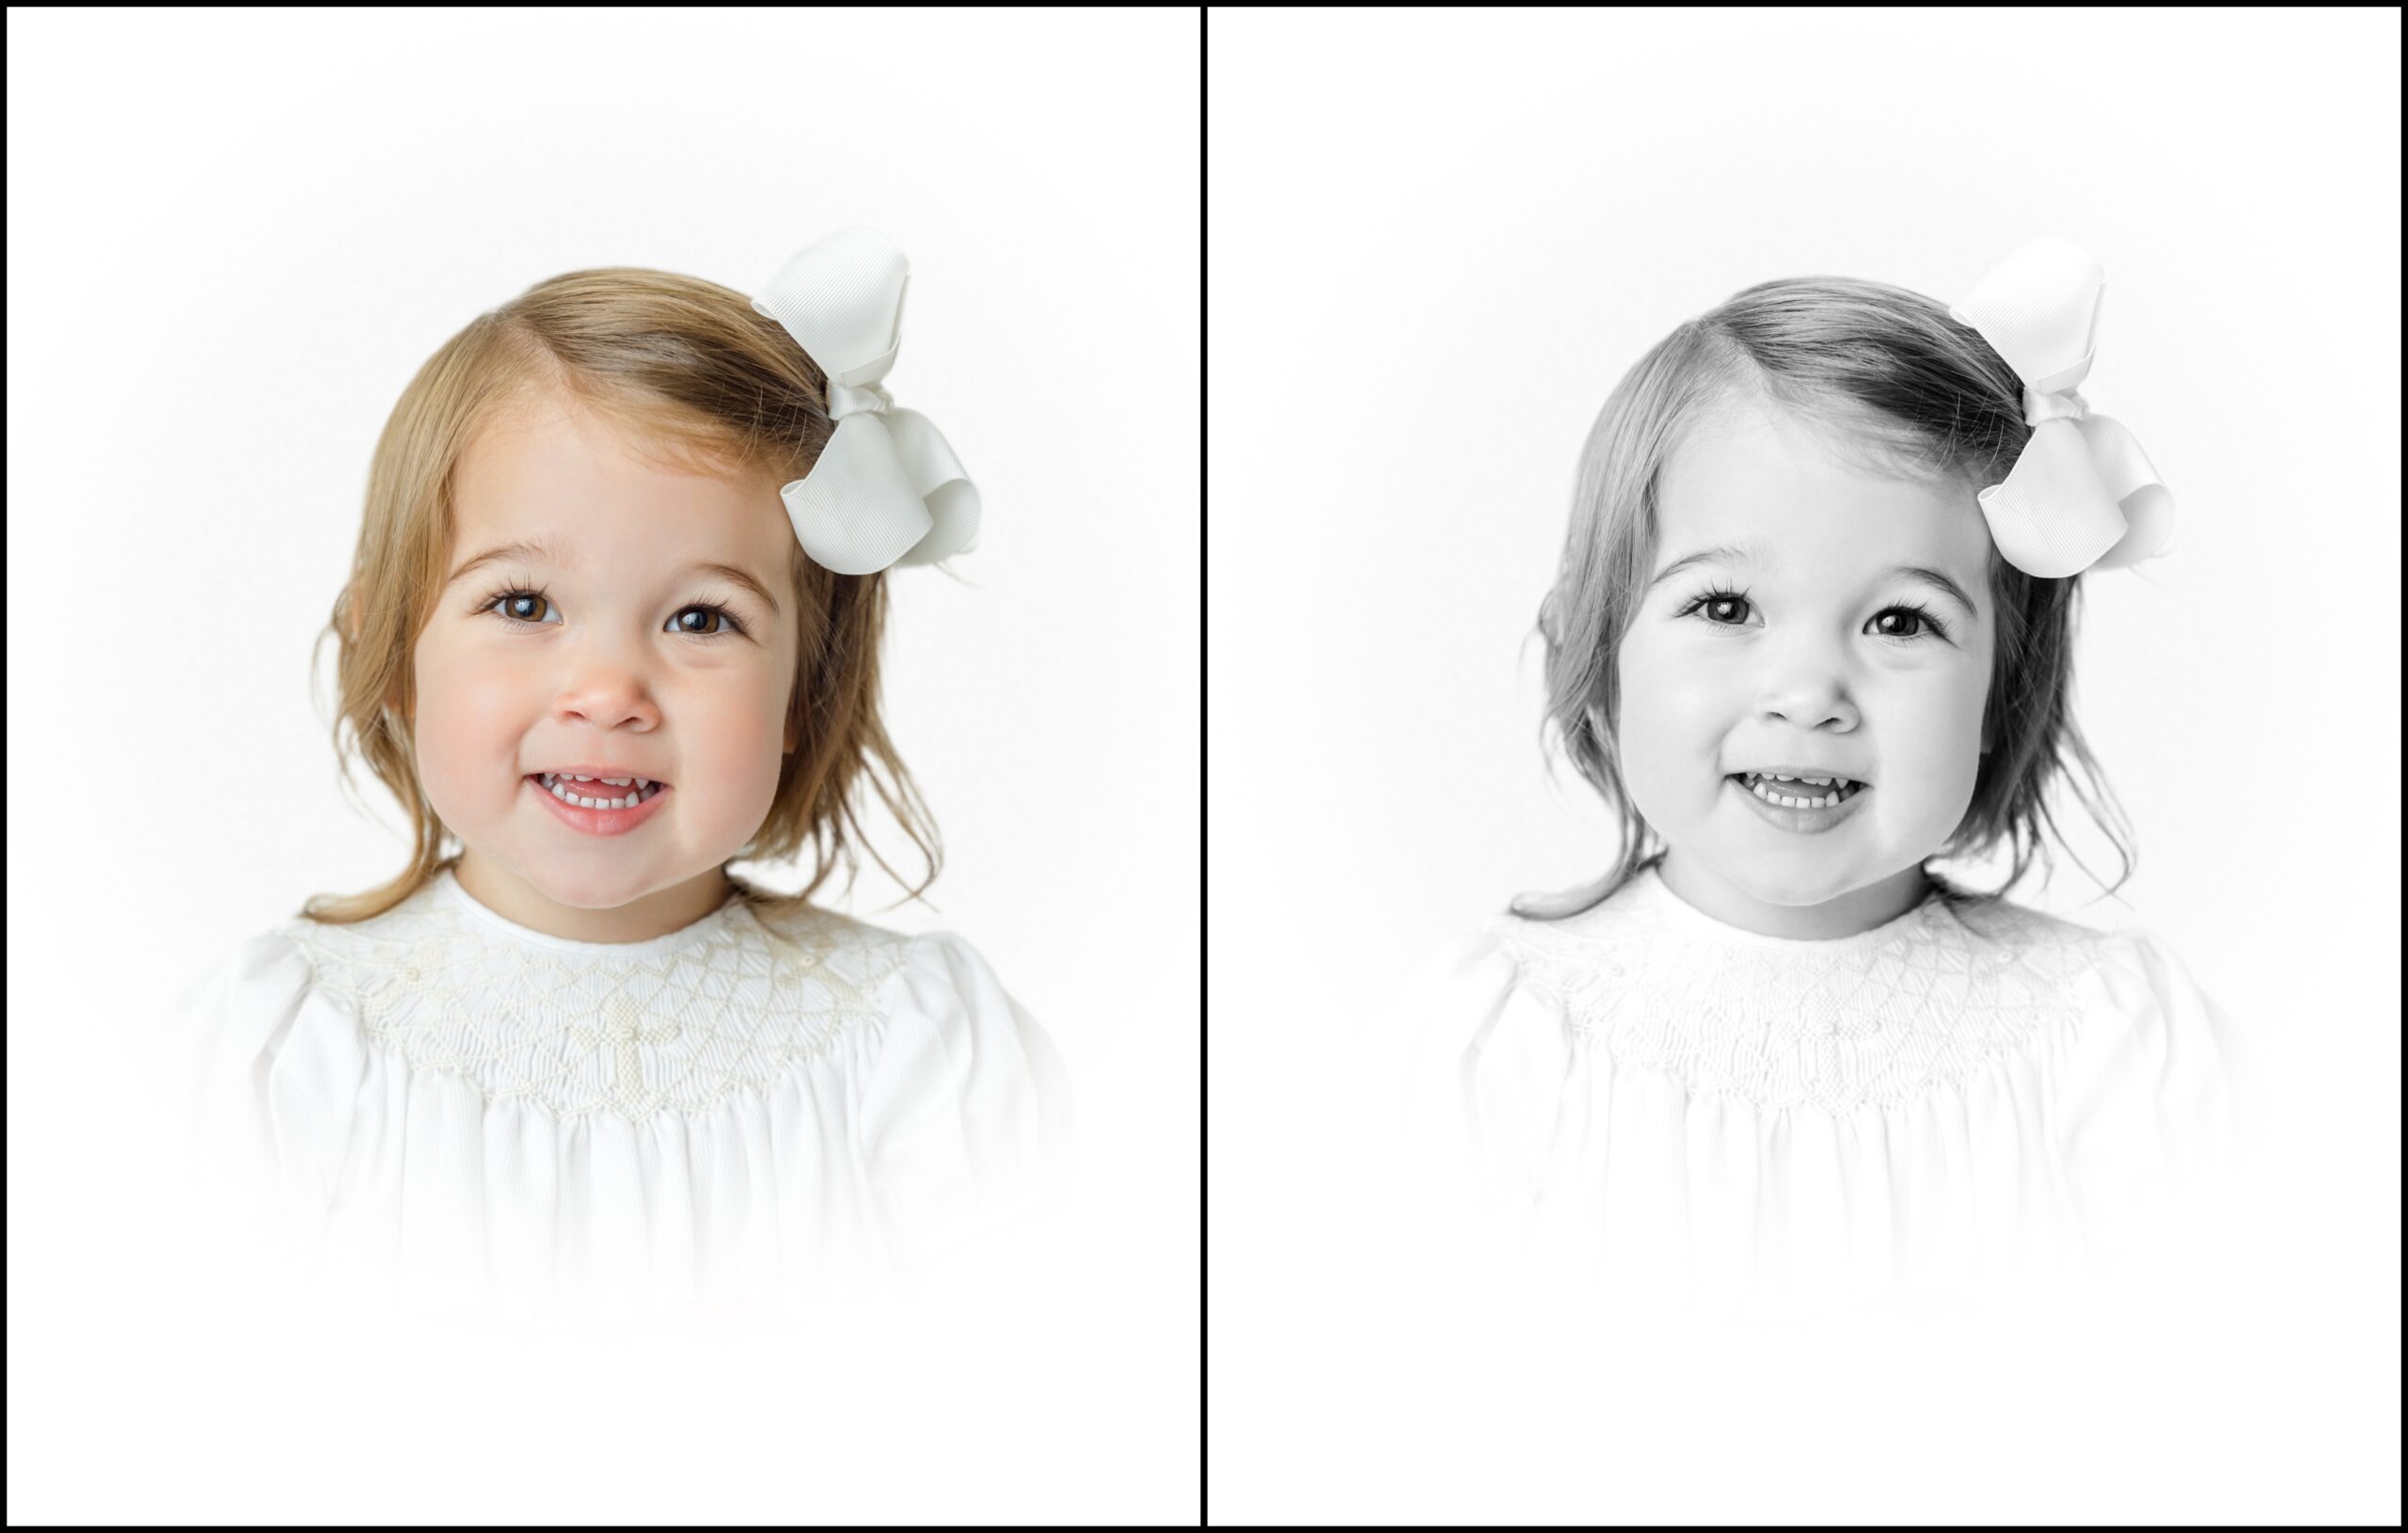 Heirloom portrait of a two year old girl